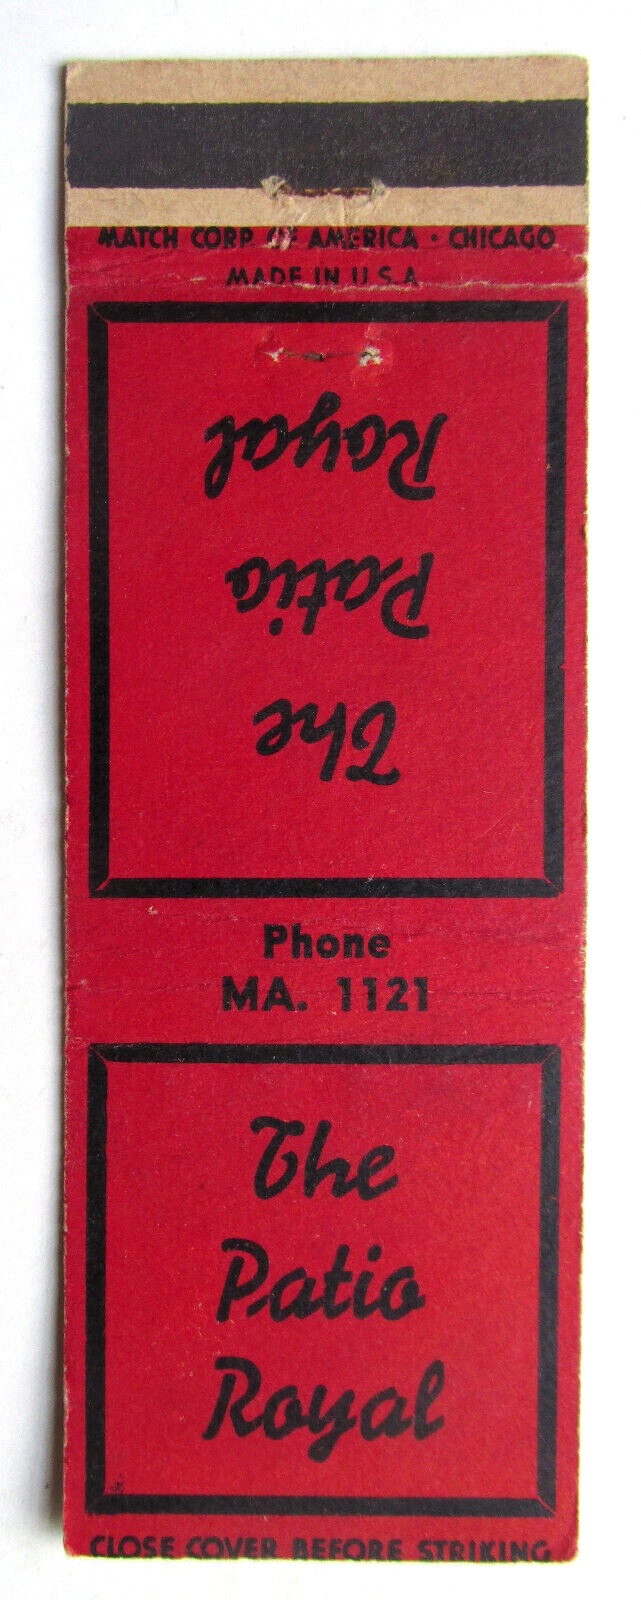 Primary image for The Patio Royal - New Orleans, Louisiana Restaurant 20 Strike Matchbook Cover LA